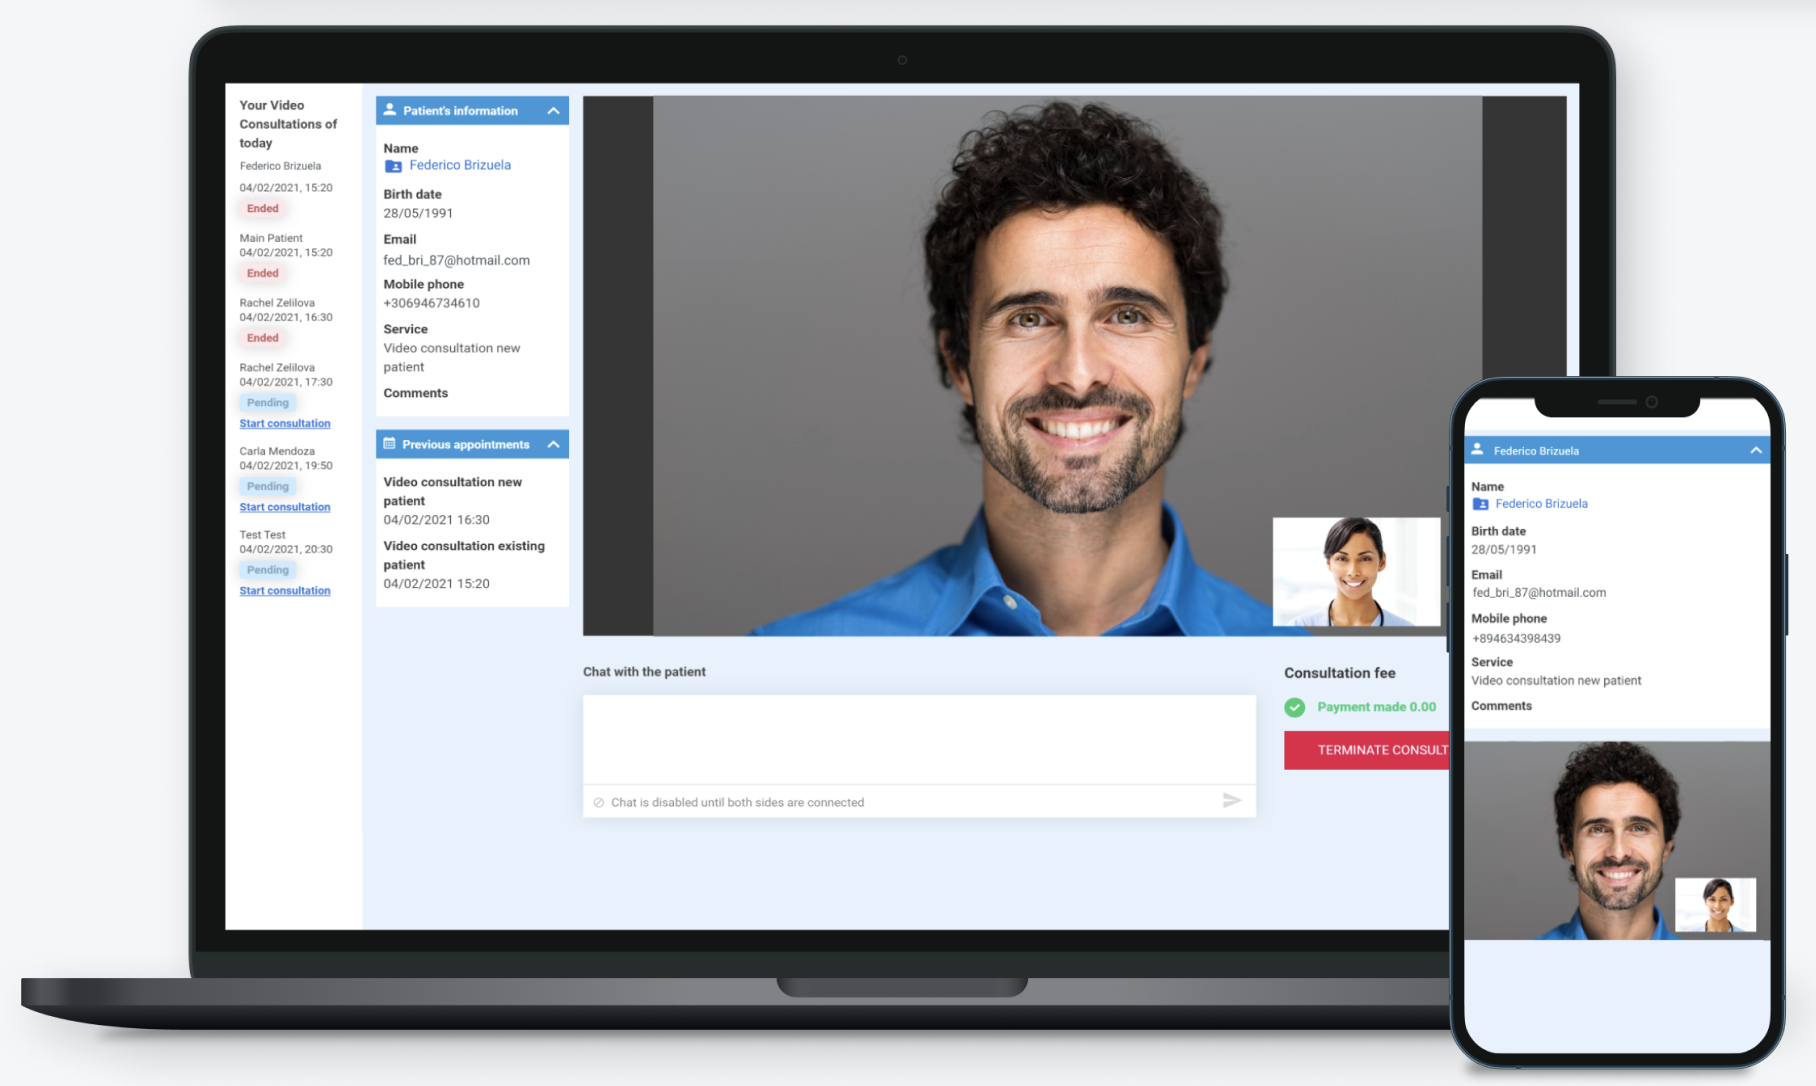 Make your medical consultation virtual: Connect with your patients for regular or urgent care appointments with our secure telehealth platform.